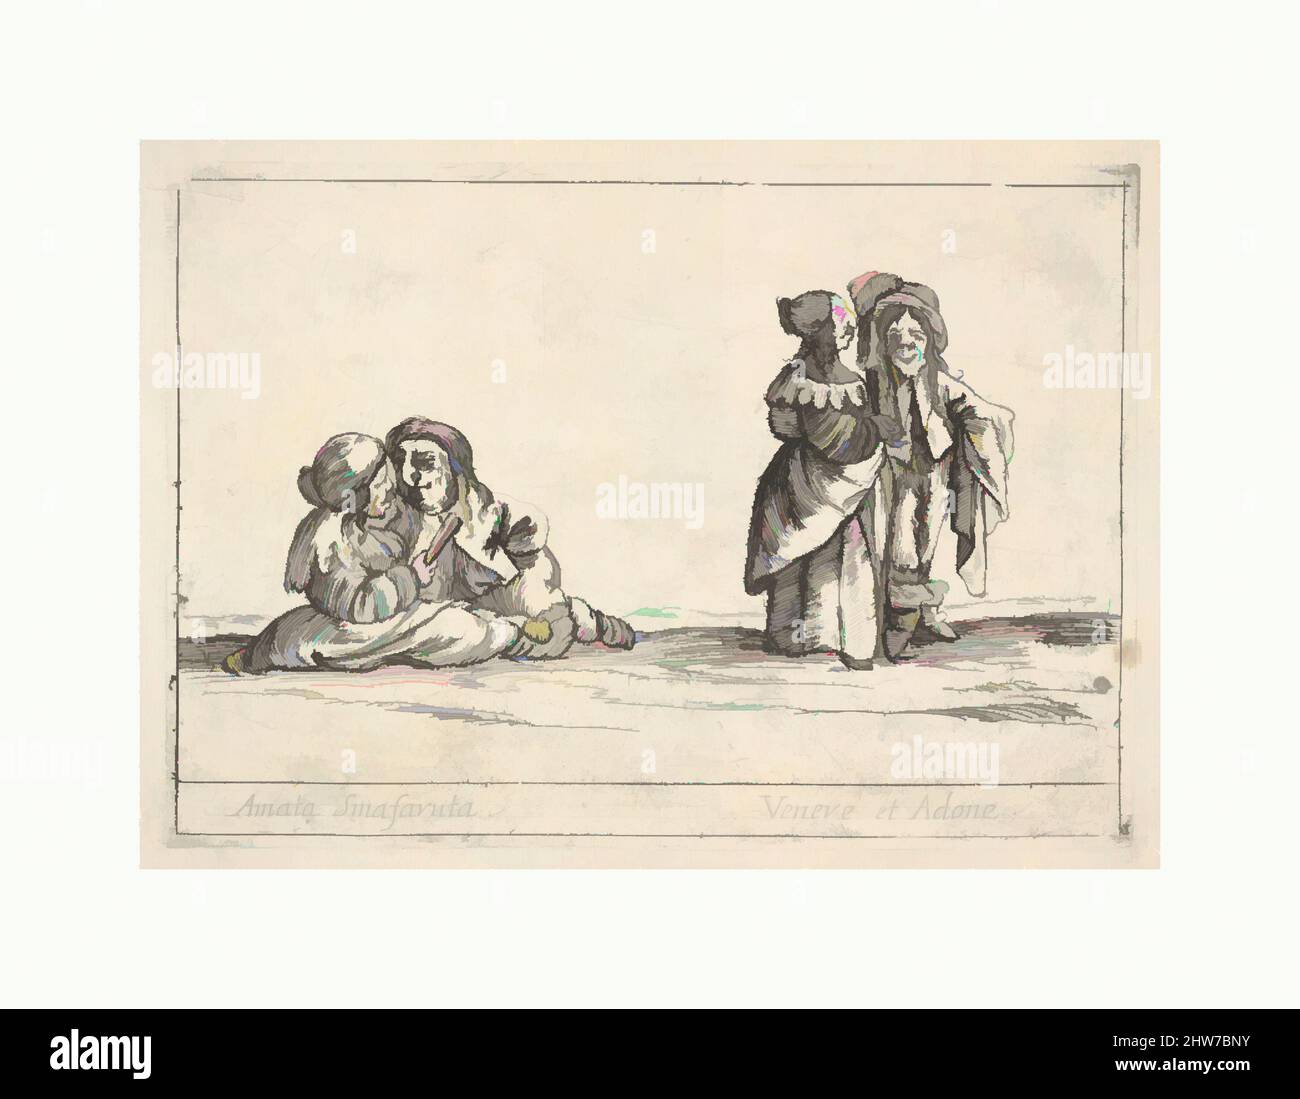 Art inspired by Callot figures; two seated dwarf lovers to left, the woman holding a fan, an old dwarf woman, in profile towards the right, standing with a dwarf man with long hair to right, from 'Six grotesques' (Six pièces de figures grotesques), 1684, Etching, plate: 5 3/8 x 7 5/8, Classic works modernized by Artotop with a splash of modernity. Shapes, color and value, eye-catching visual impact on art. Emotions through freedom of artworks in a contemporary way. A timeless message pursuing a wildly creative new direction. Artists turning to the digital medium and creating the Artotop NFT Stock Photo